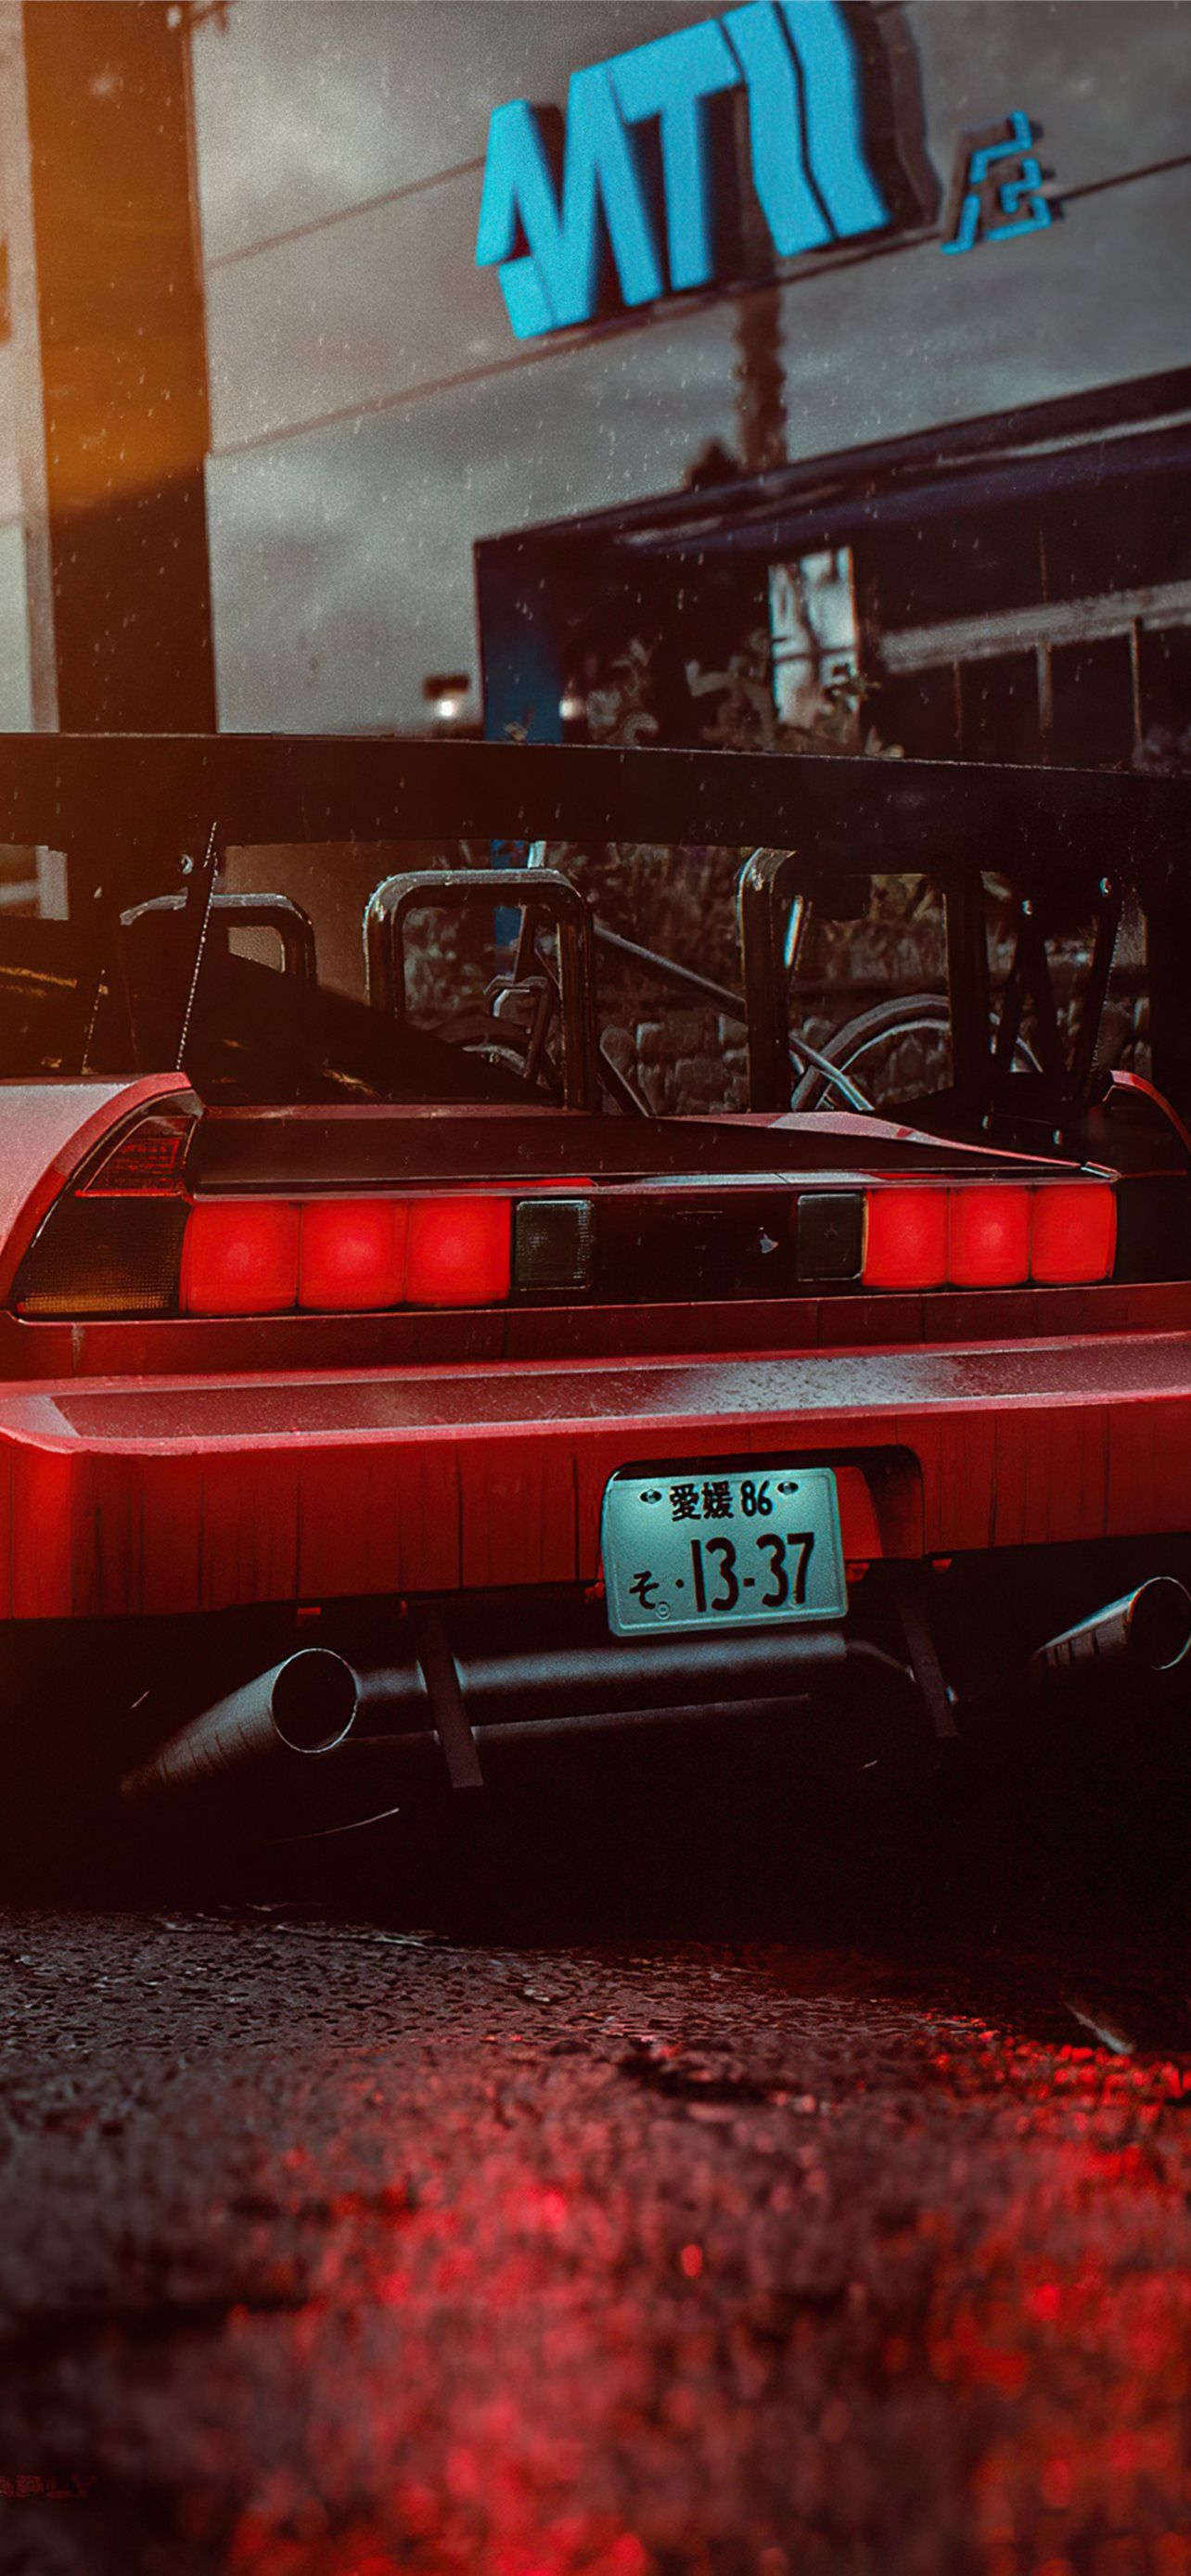 Honda Nsx Rear Need For Speed 2020 4k Sony Xperia. iPhone Wallpaper Free Download